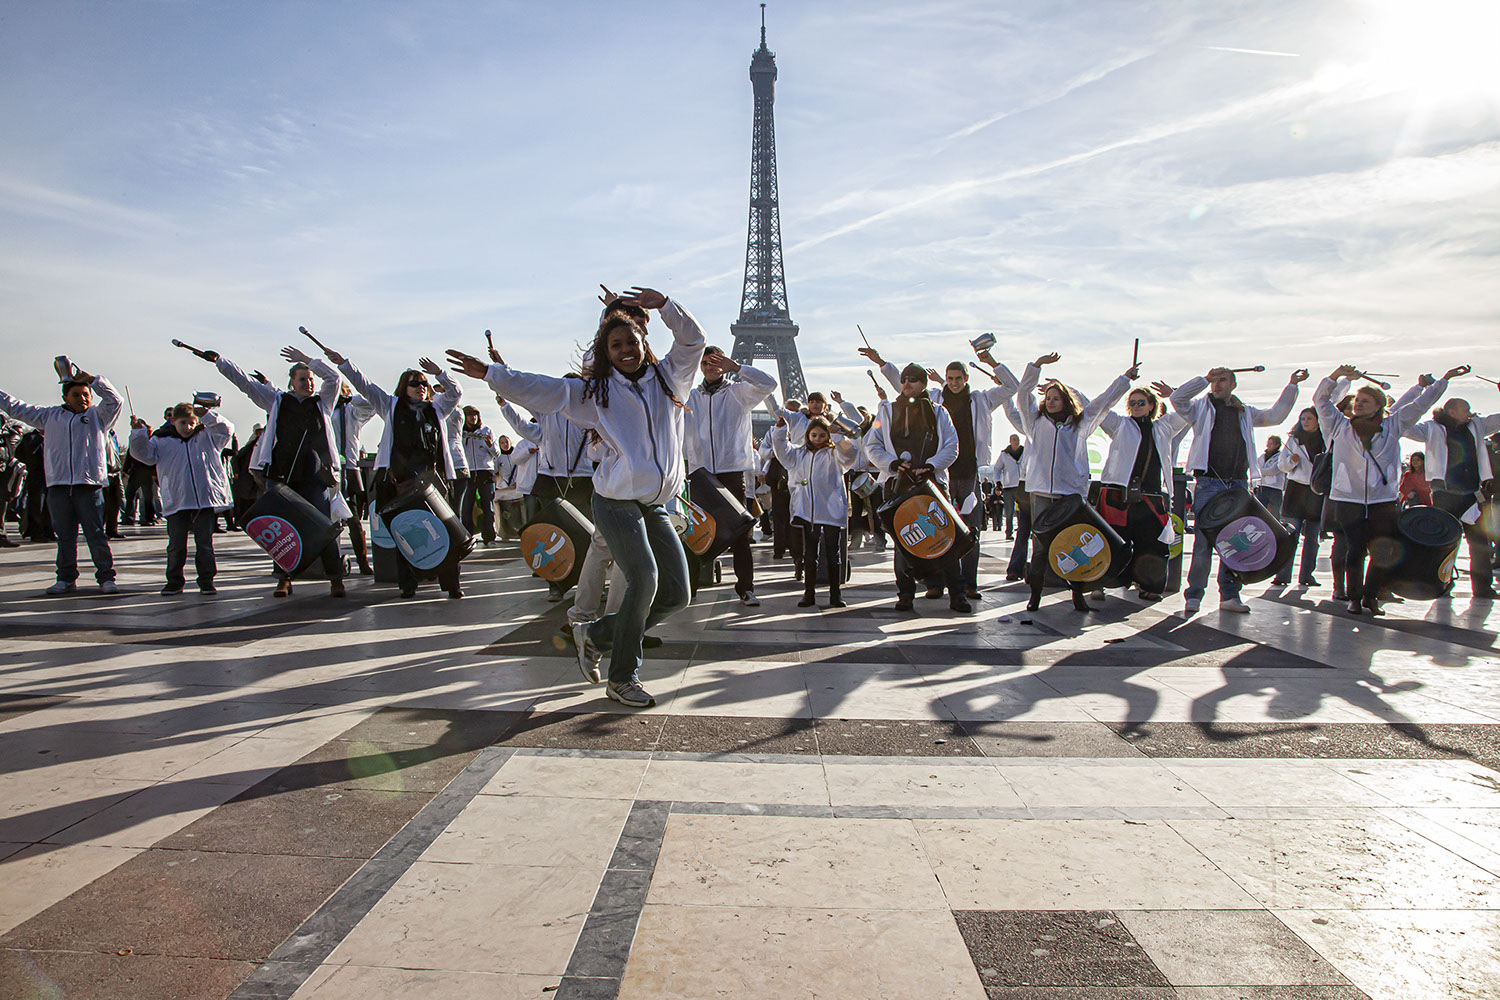 Dance and Drum Group demonstrating in Paris.